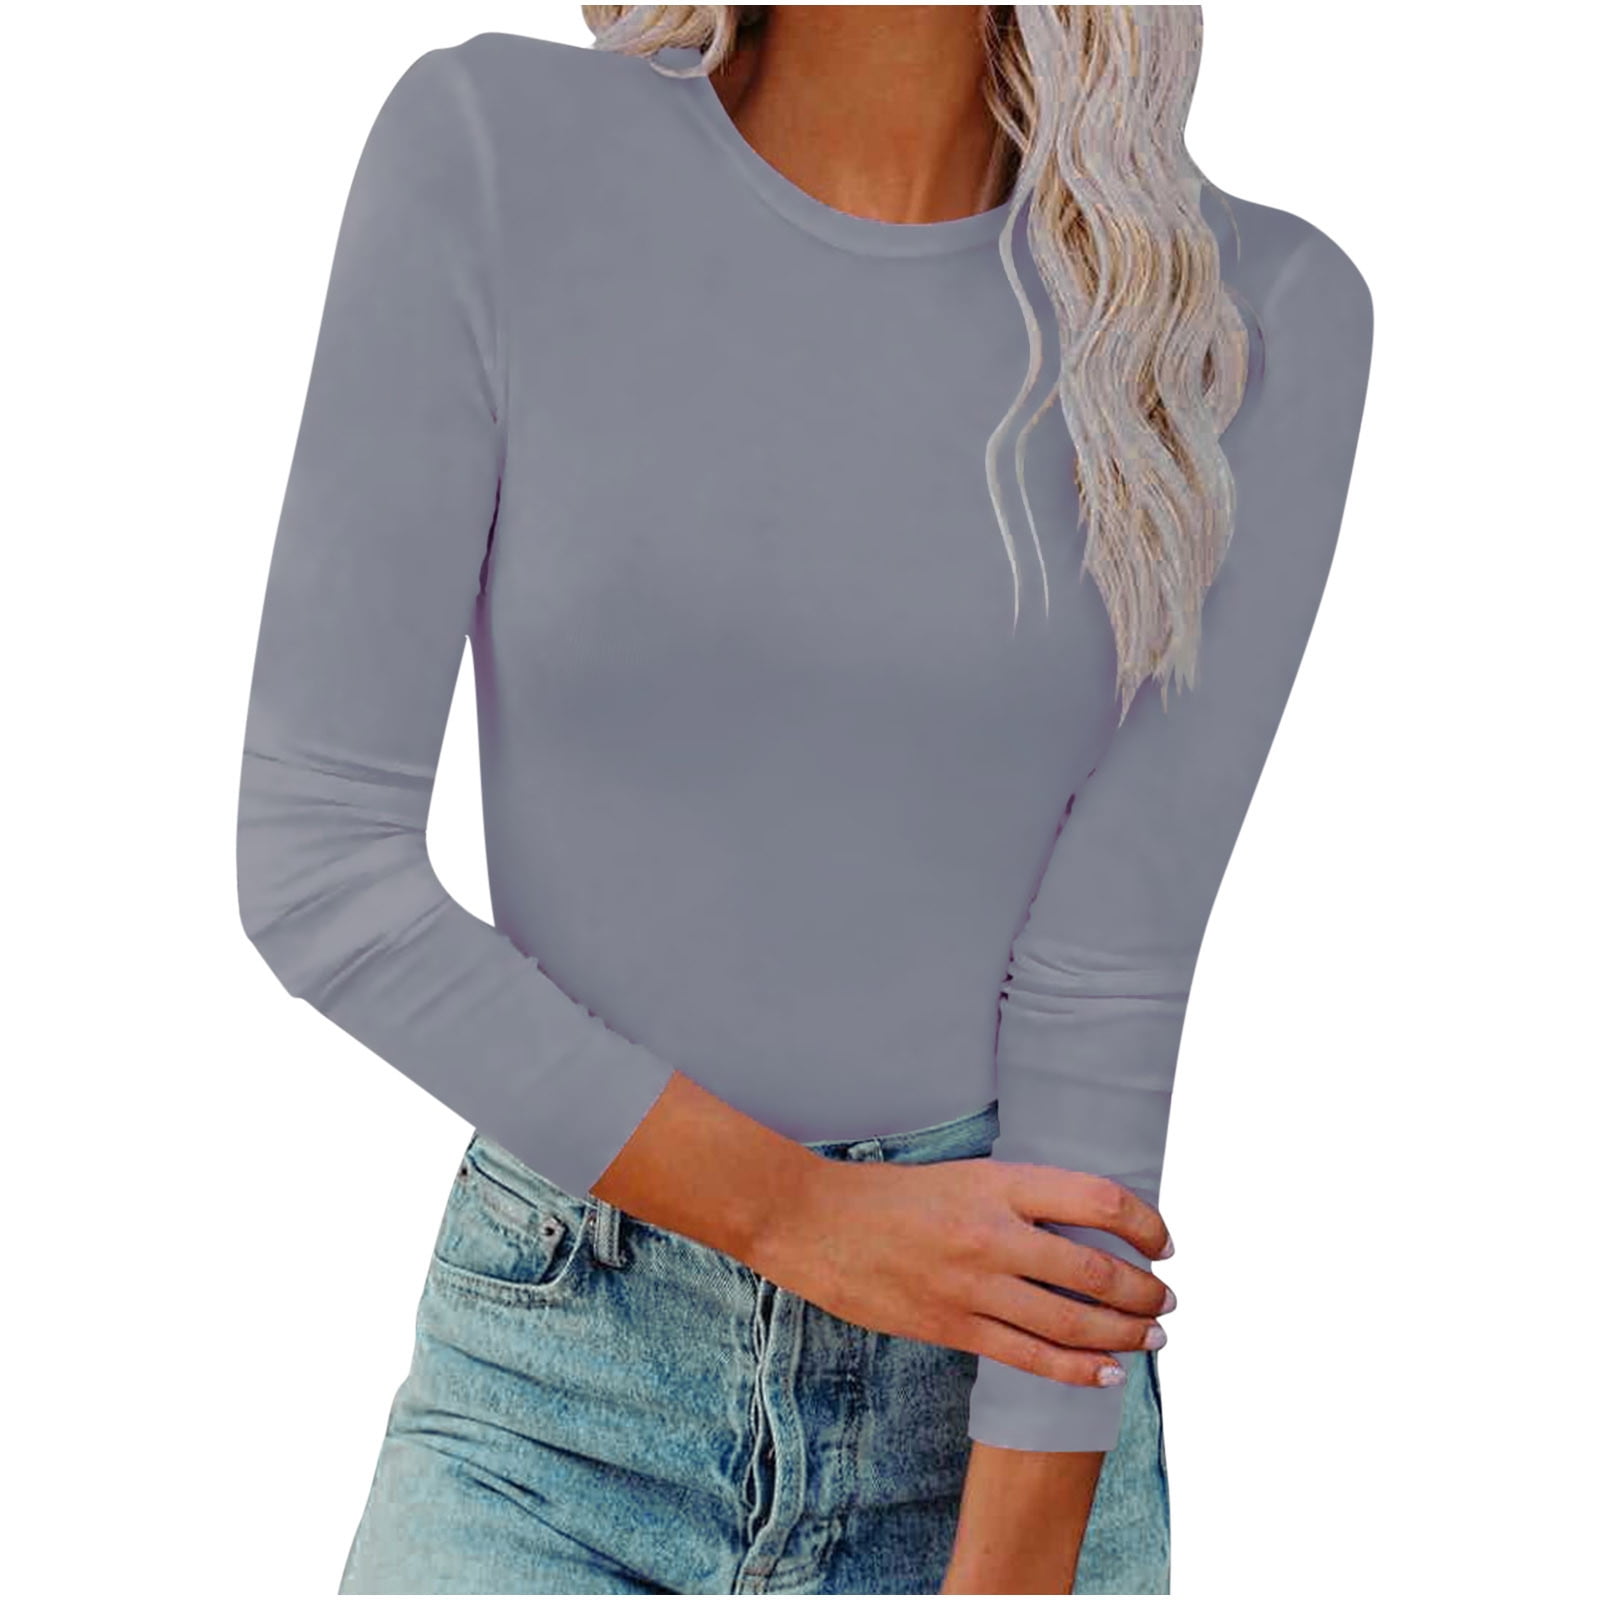 RYRJJ Going Out Tops for Women Sexy Casual Long Sleeve Solid T